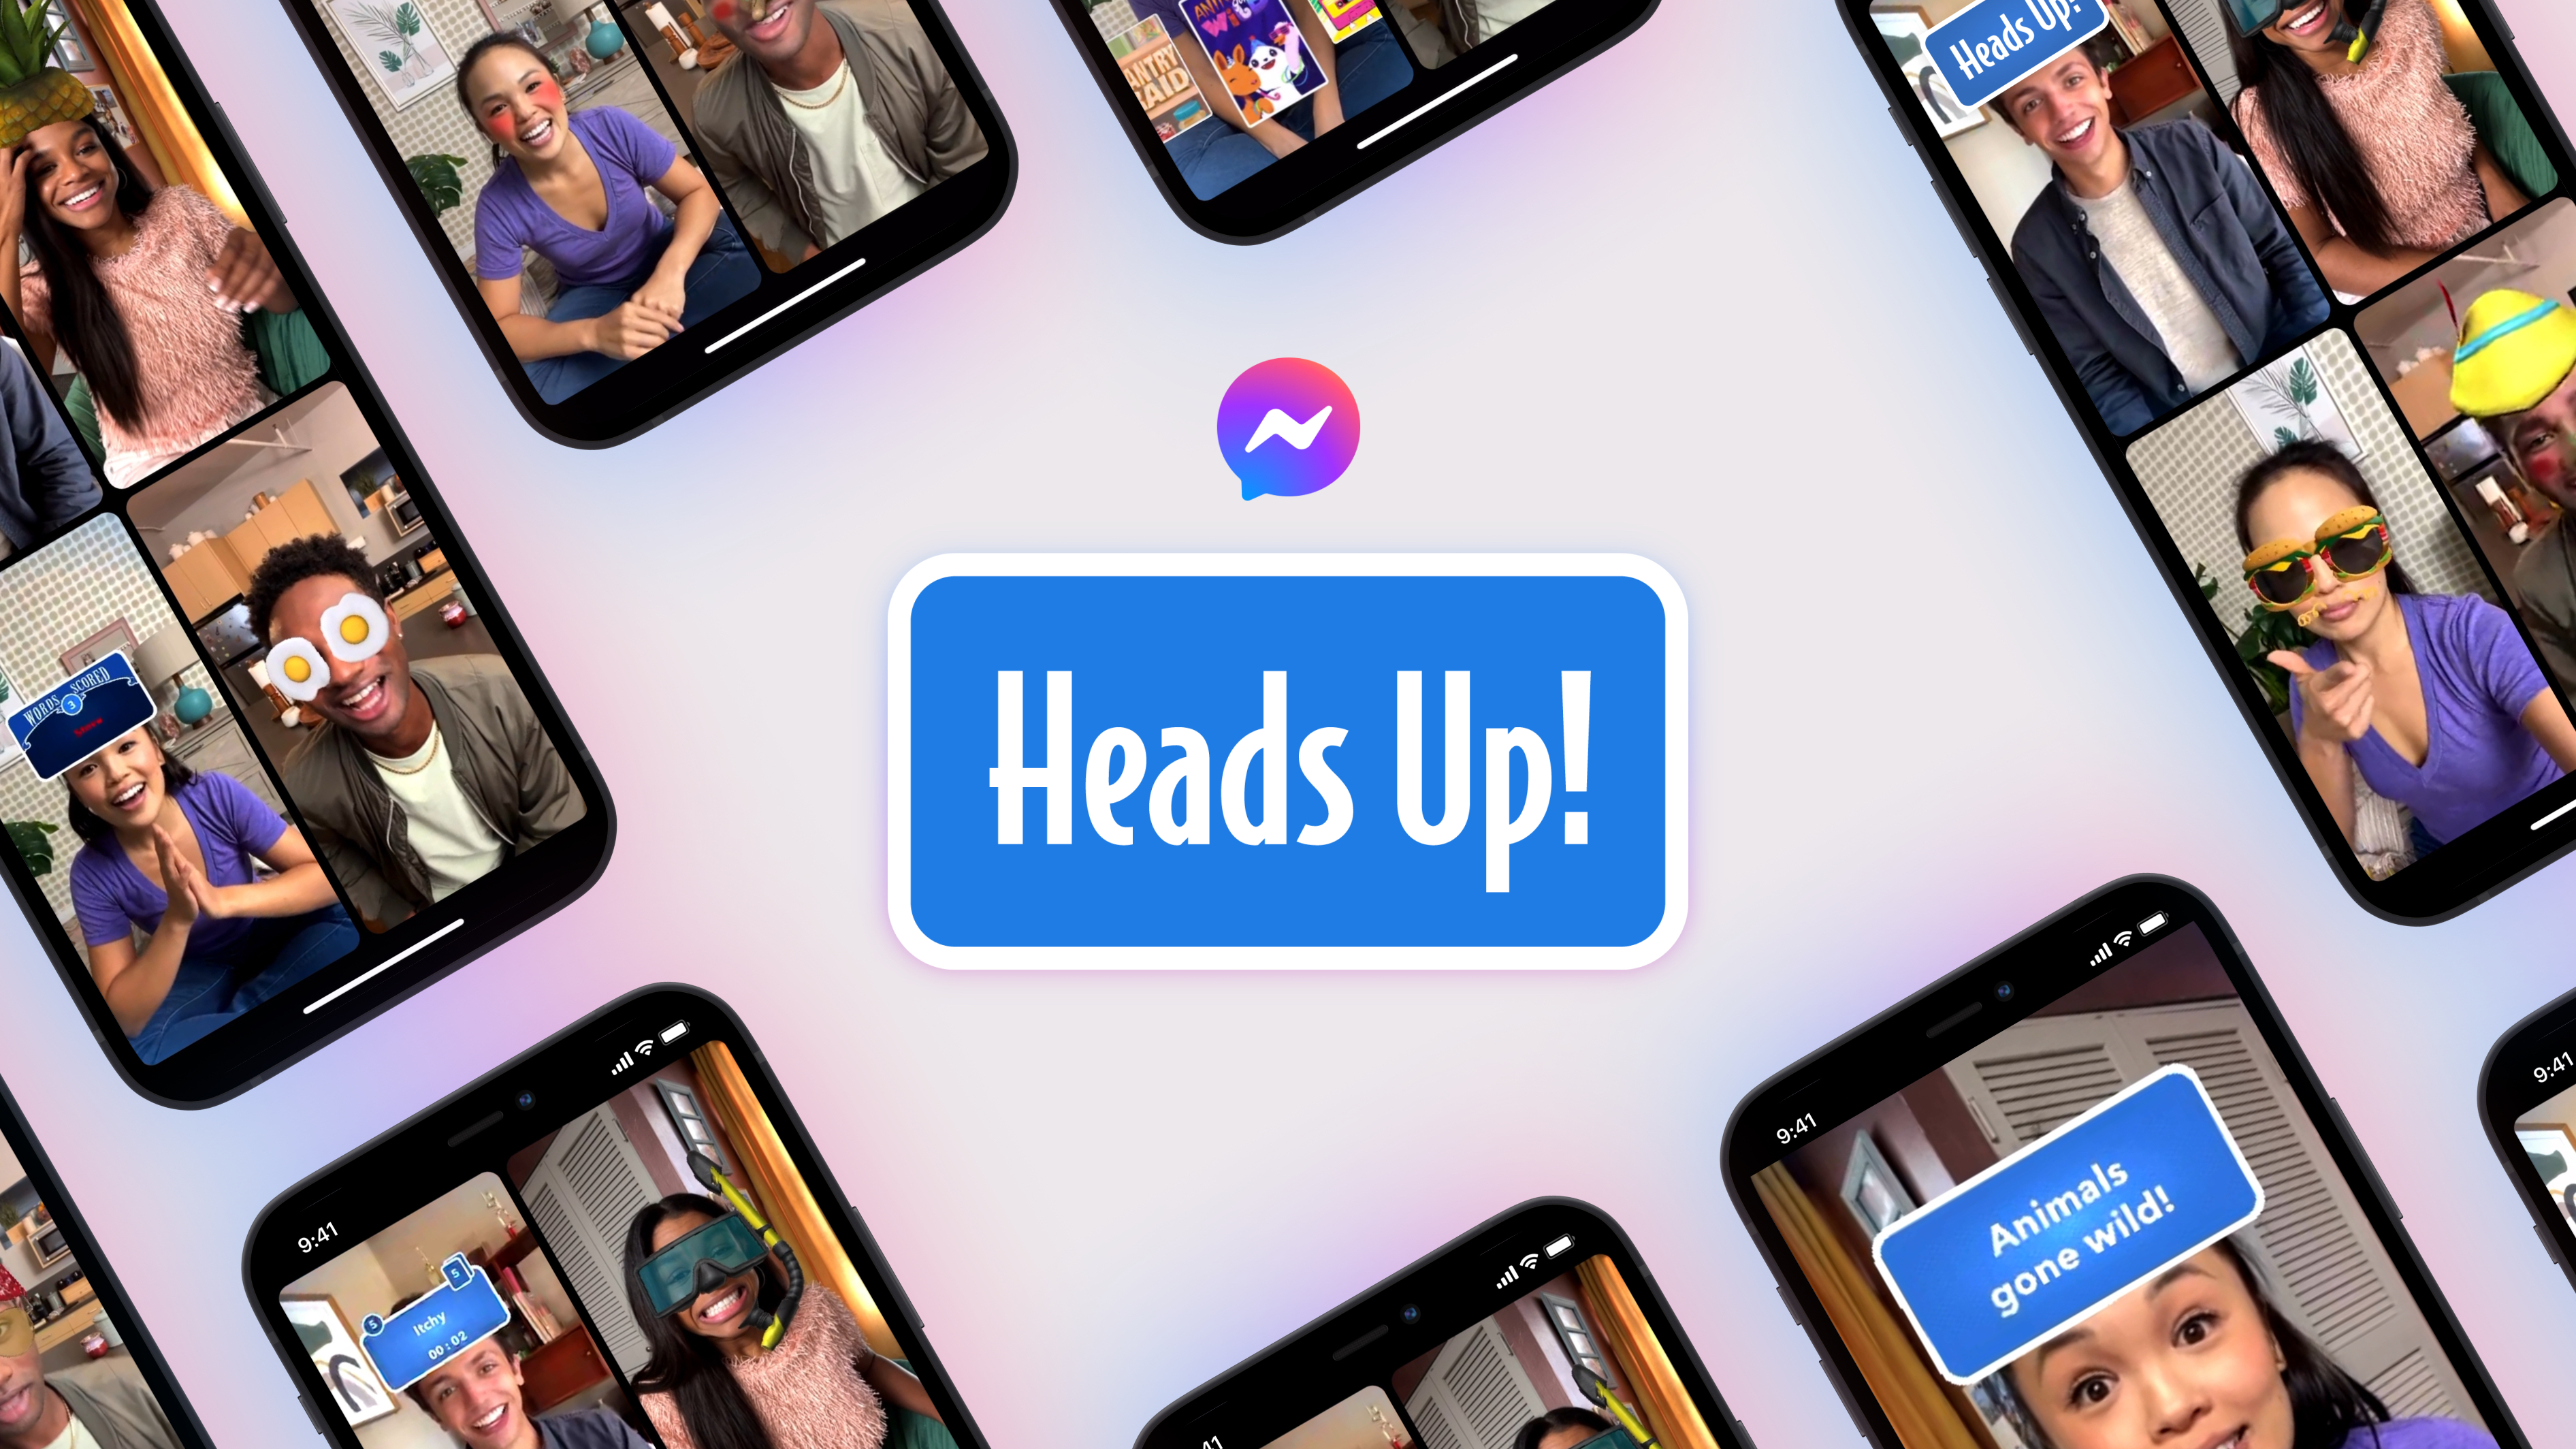 Screenshots of Heads Up on Messenger and Instagram